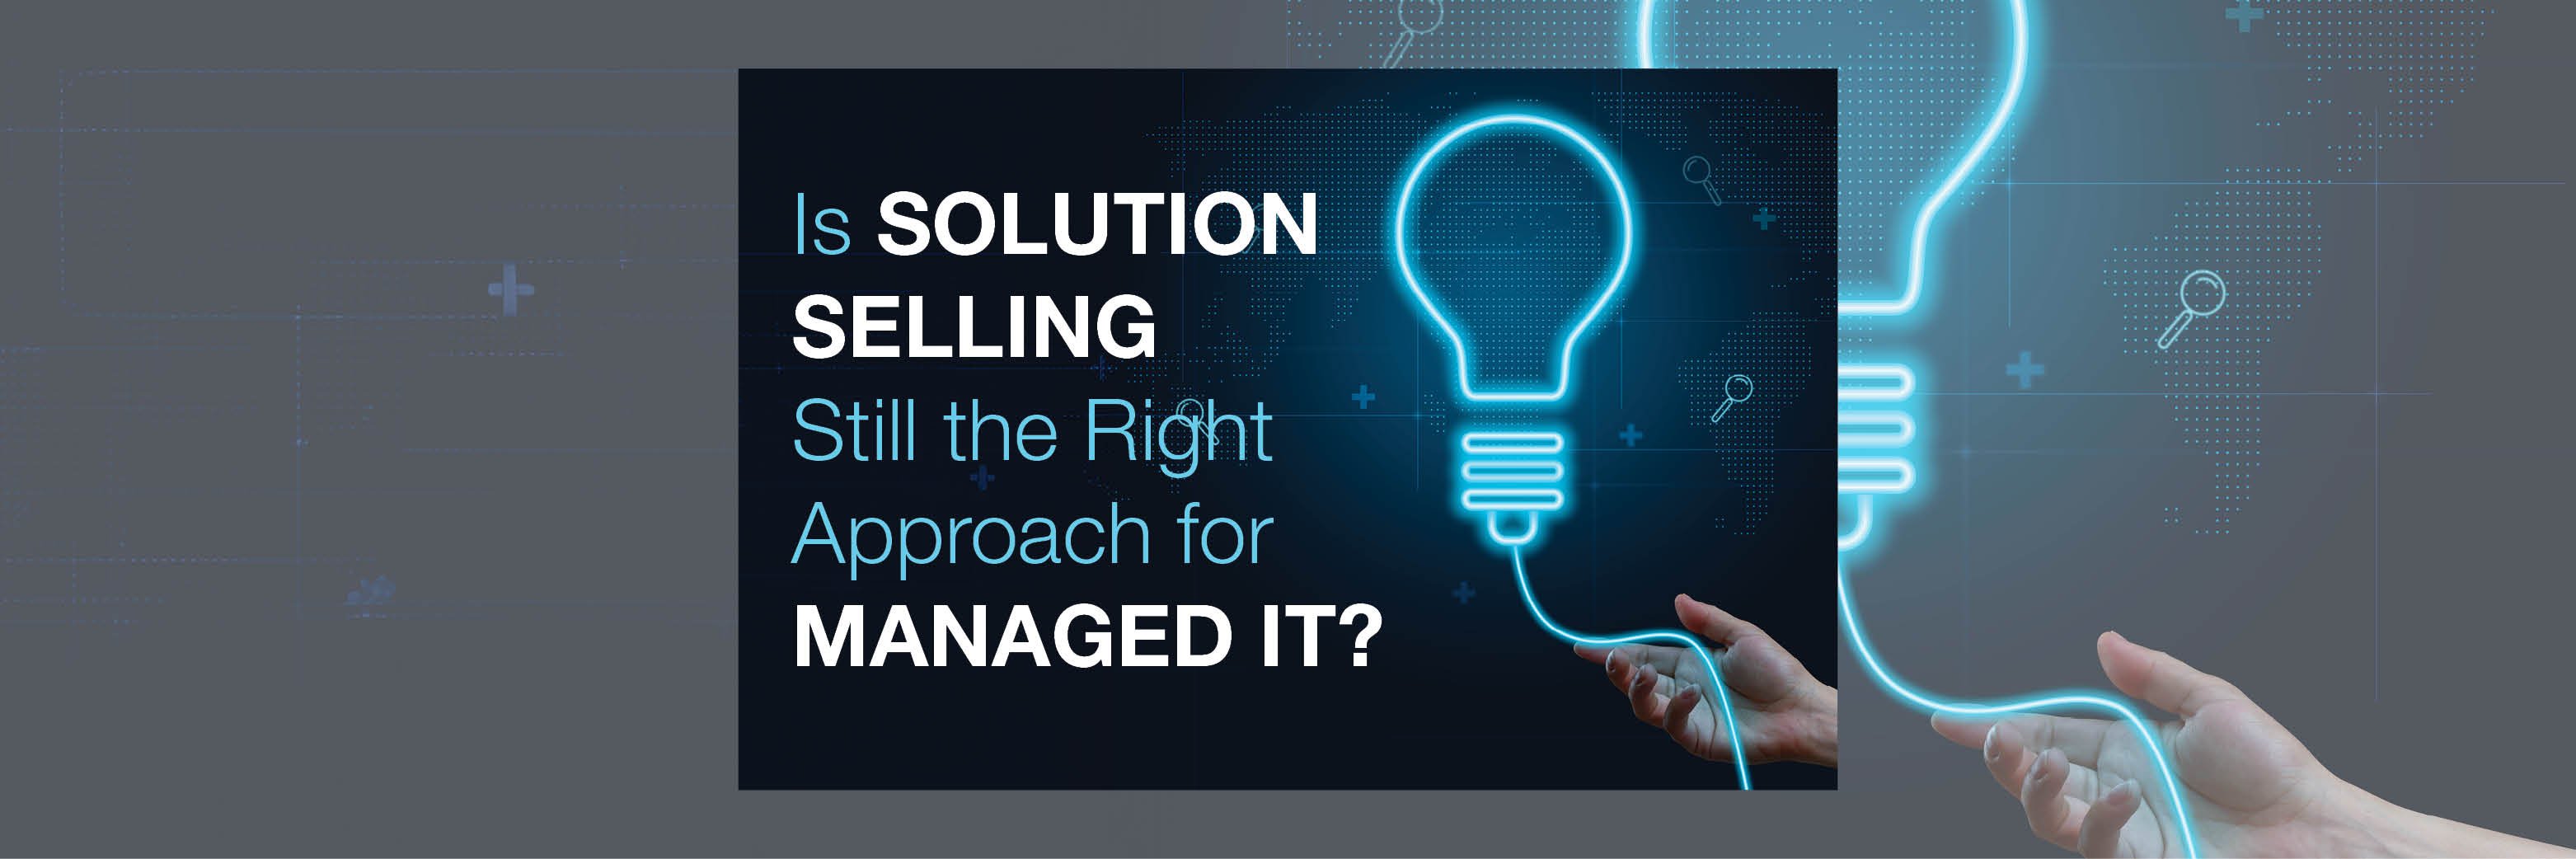 Is Solution Selling Still the Right Approach for Managed IT?